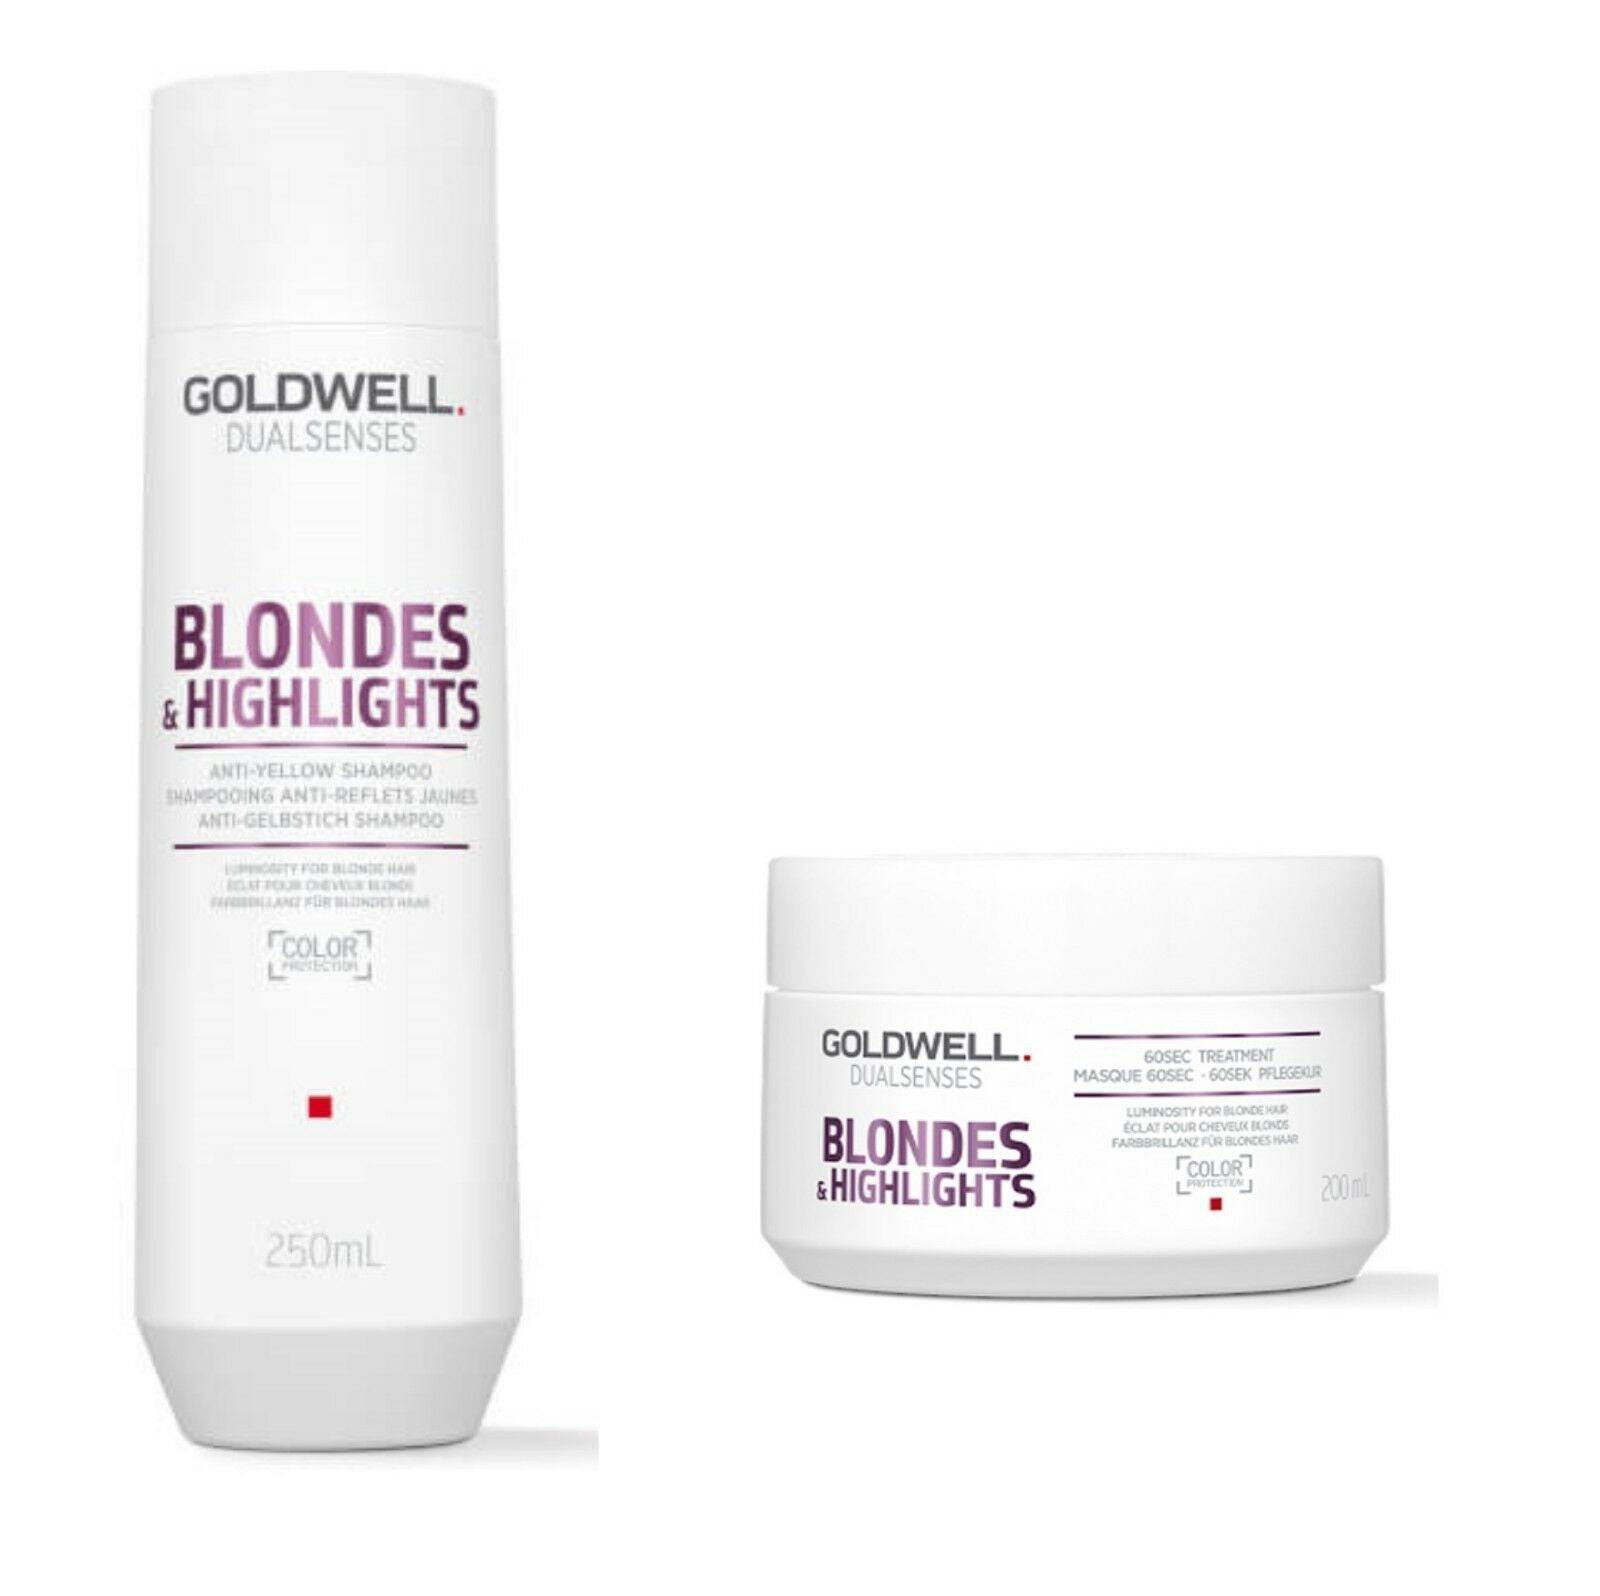 Goldwell Blondes & Highlights Anti Yellow Brassiness &